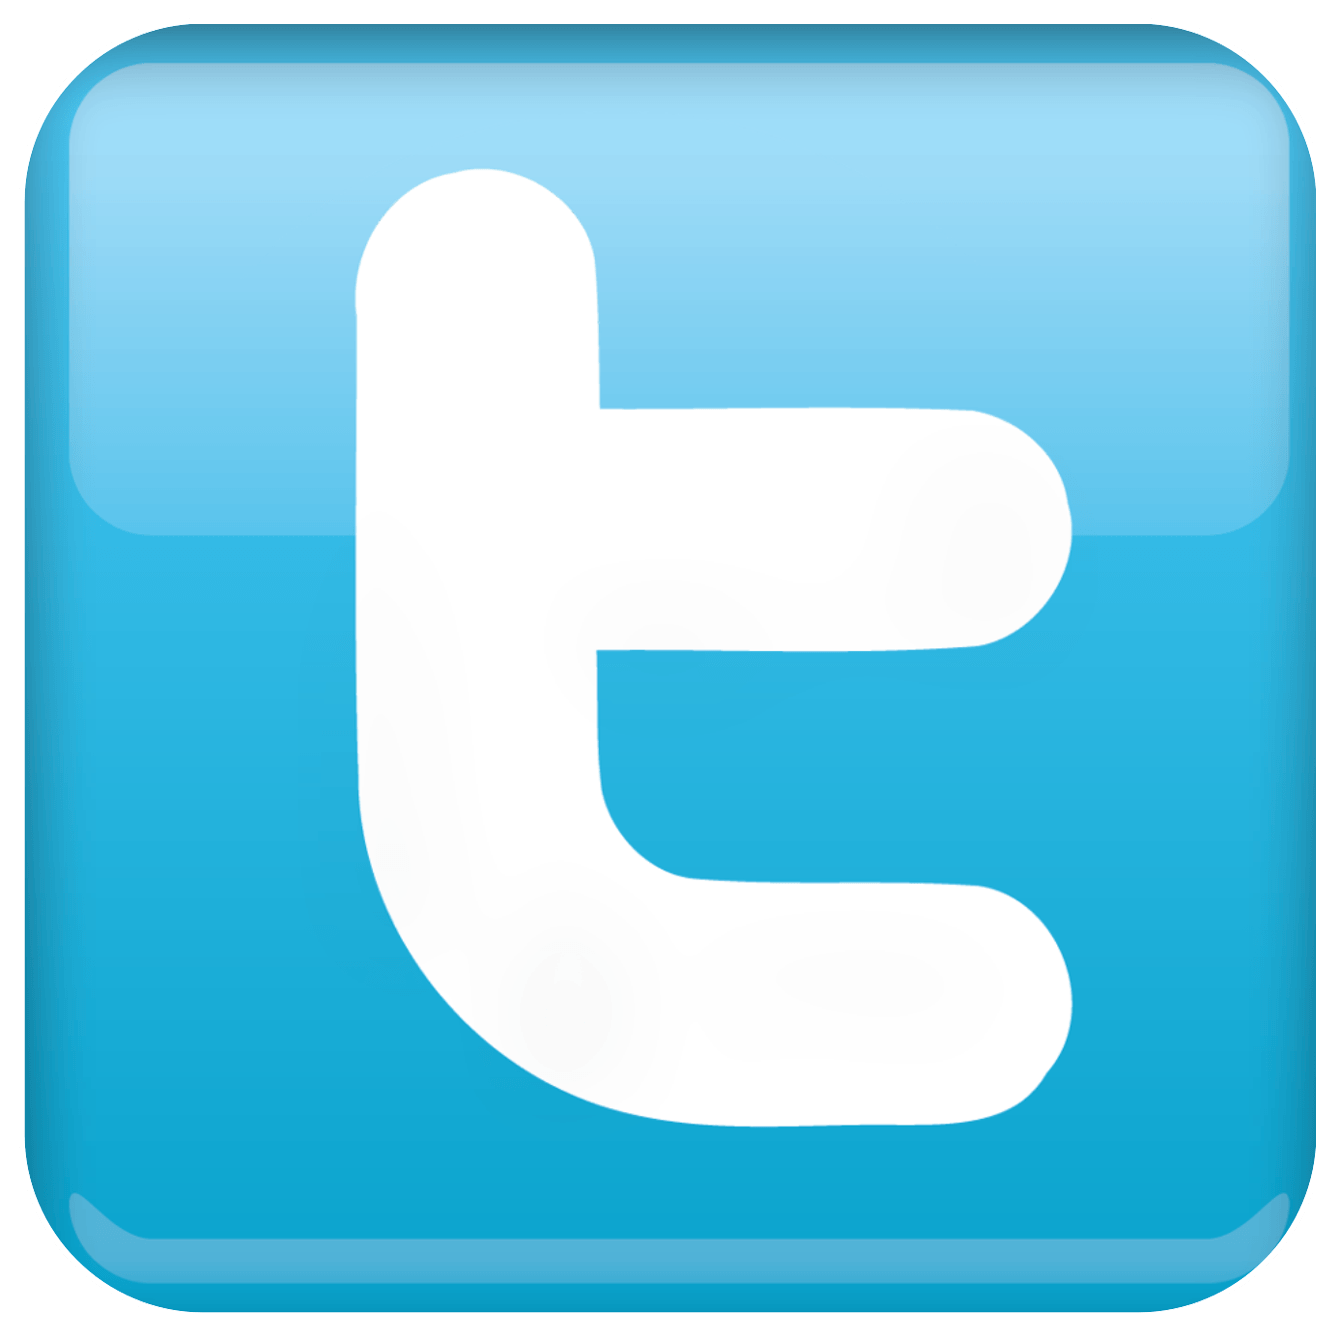 Tweet App Logo - Logo Twitter Transparent PNG Pictures - Free Icons and PNG Backgrounds